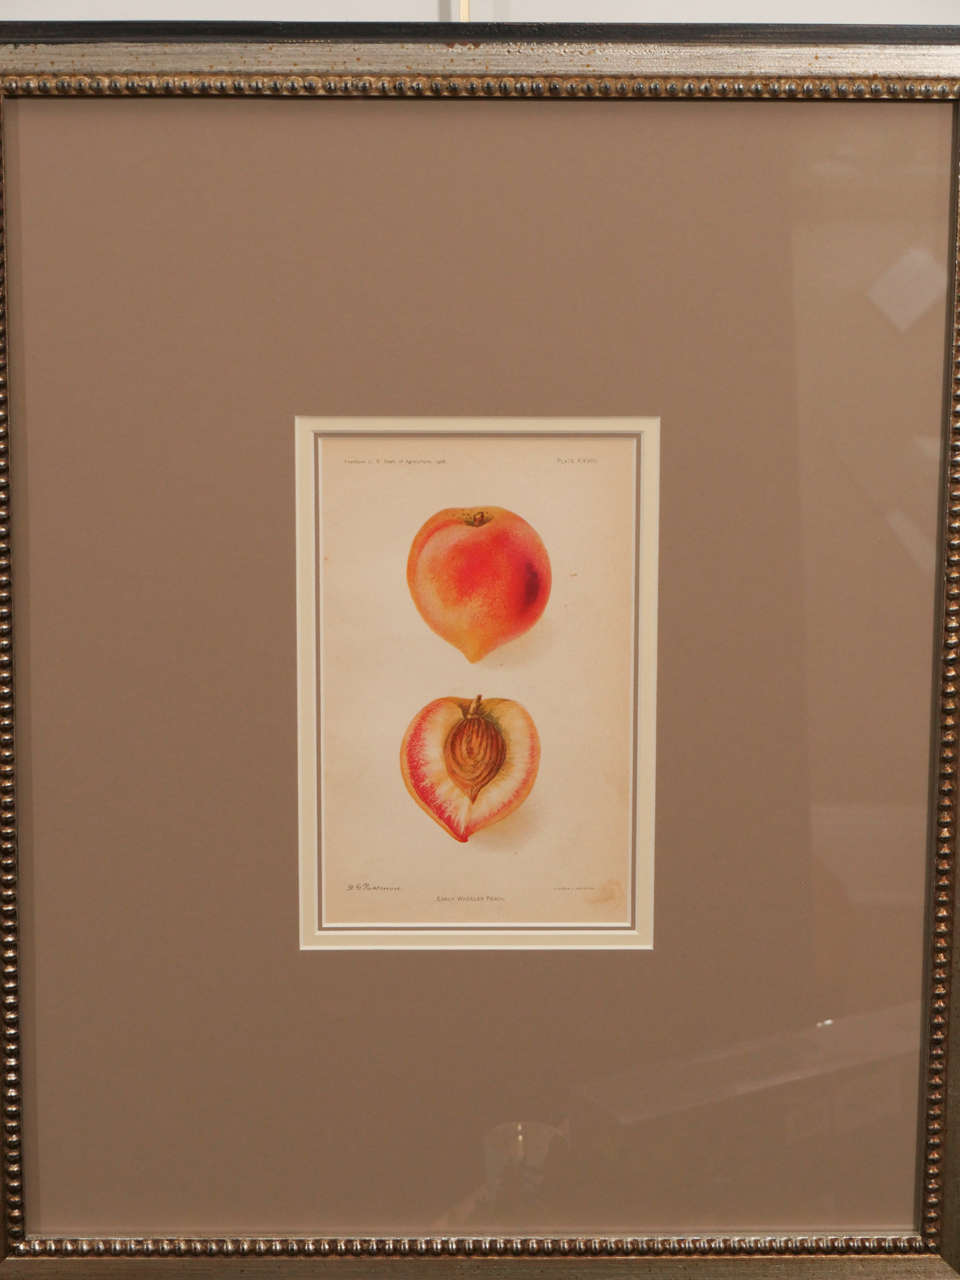 A set of early 20th century prints of various fruits from the US Department of agriculture yearbook. Beautifully matted and framed, these would add great color to a neutral kitchen. Priced separately.